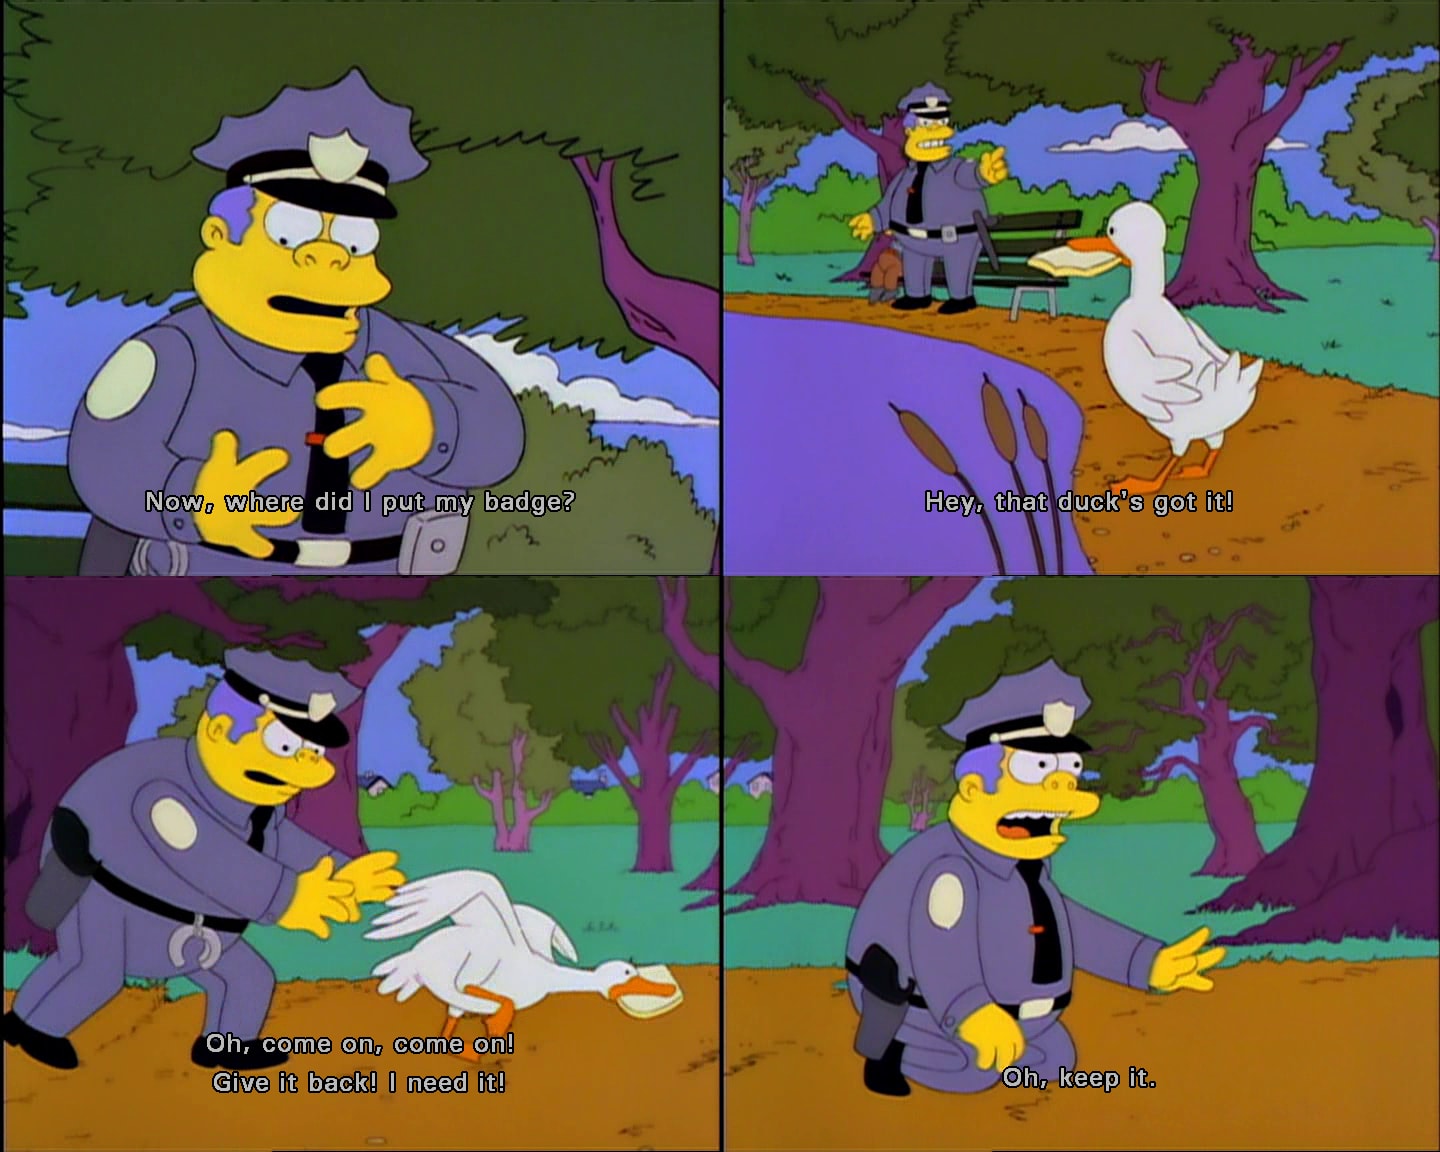 Chief Wiggum: Now, where did I put my badge? Hey, that duck's got it! Oh, come on, come on! Give it back! I need it! Oh, keep it.